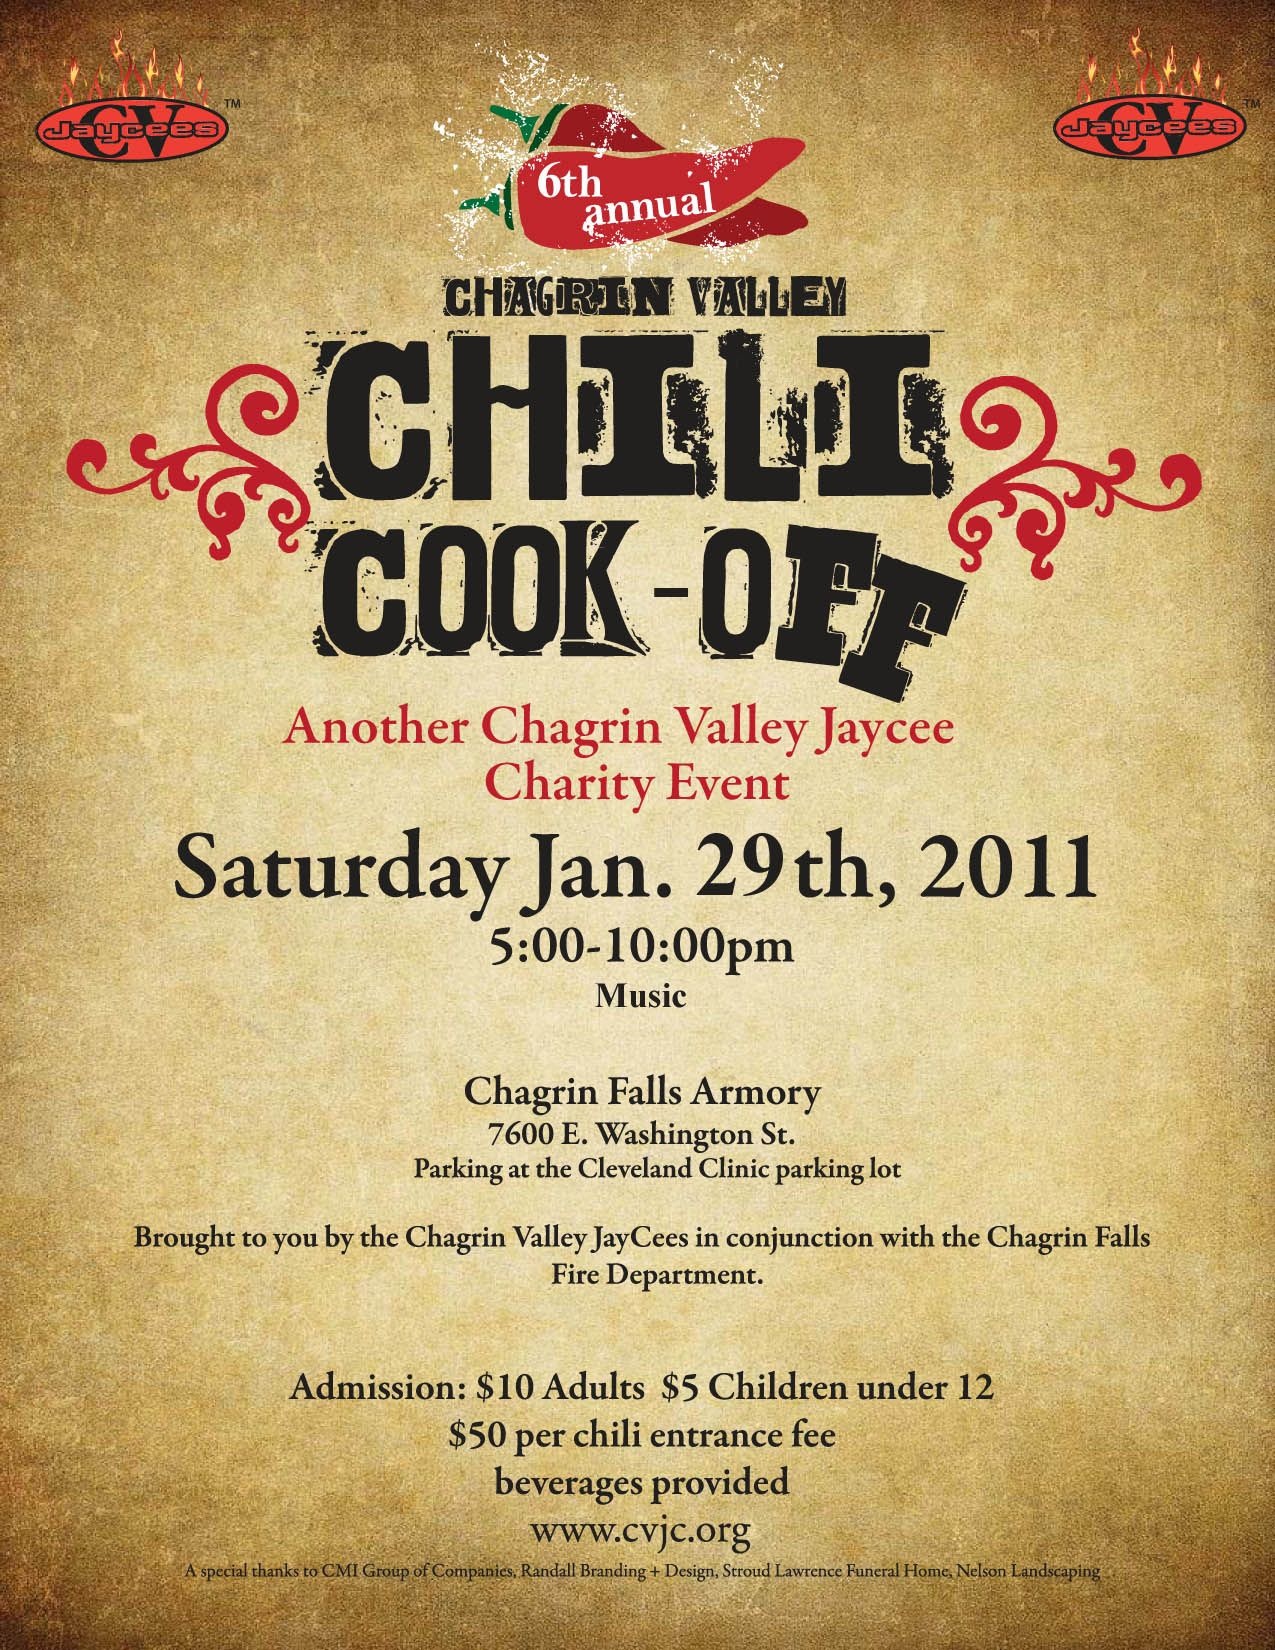 Chili Cook Off Flyer Template Free Printable - Wow - Image - Free Printable Fundraiser Flyer Templates